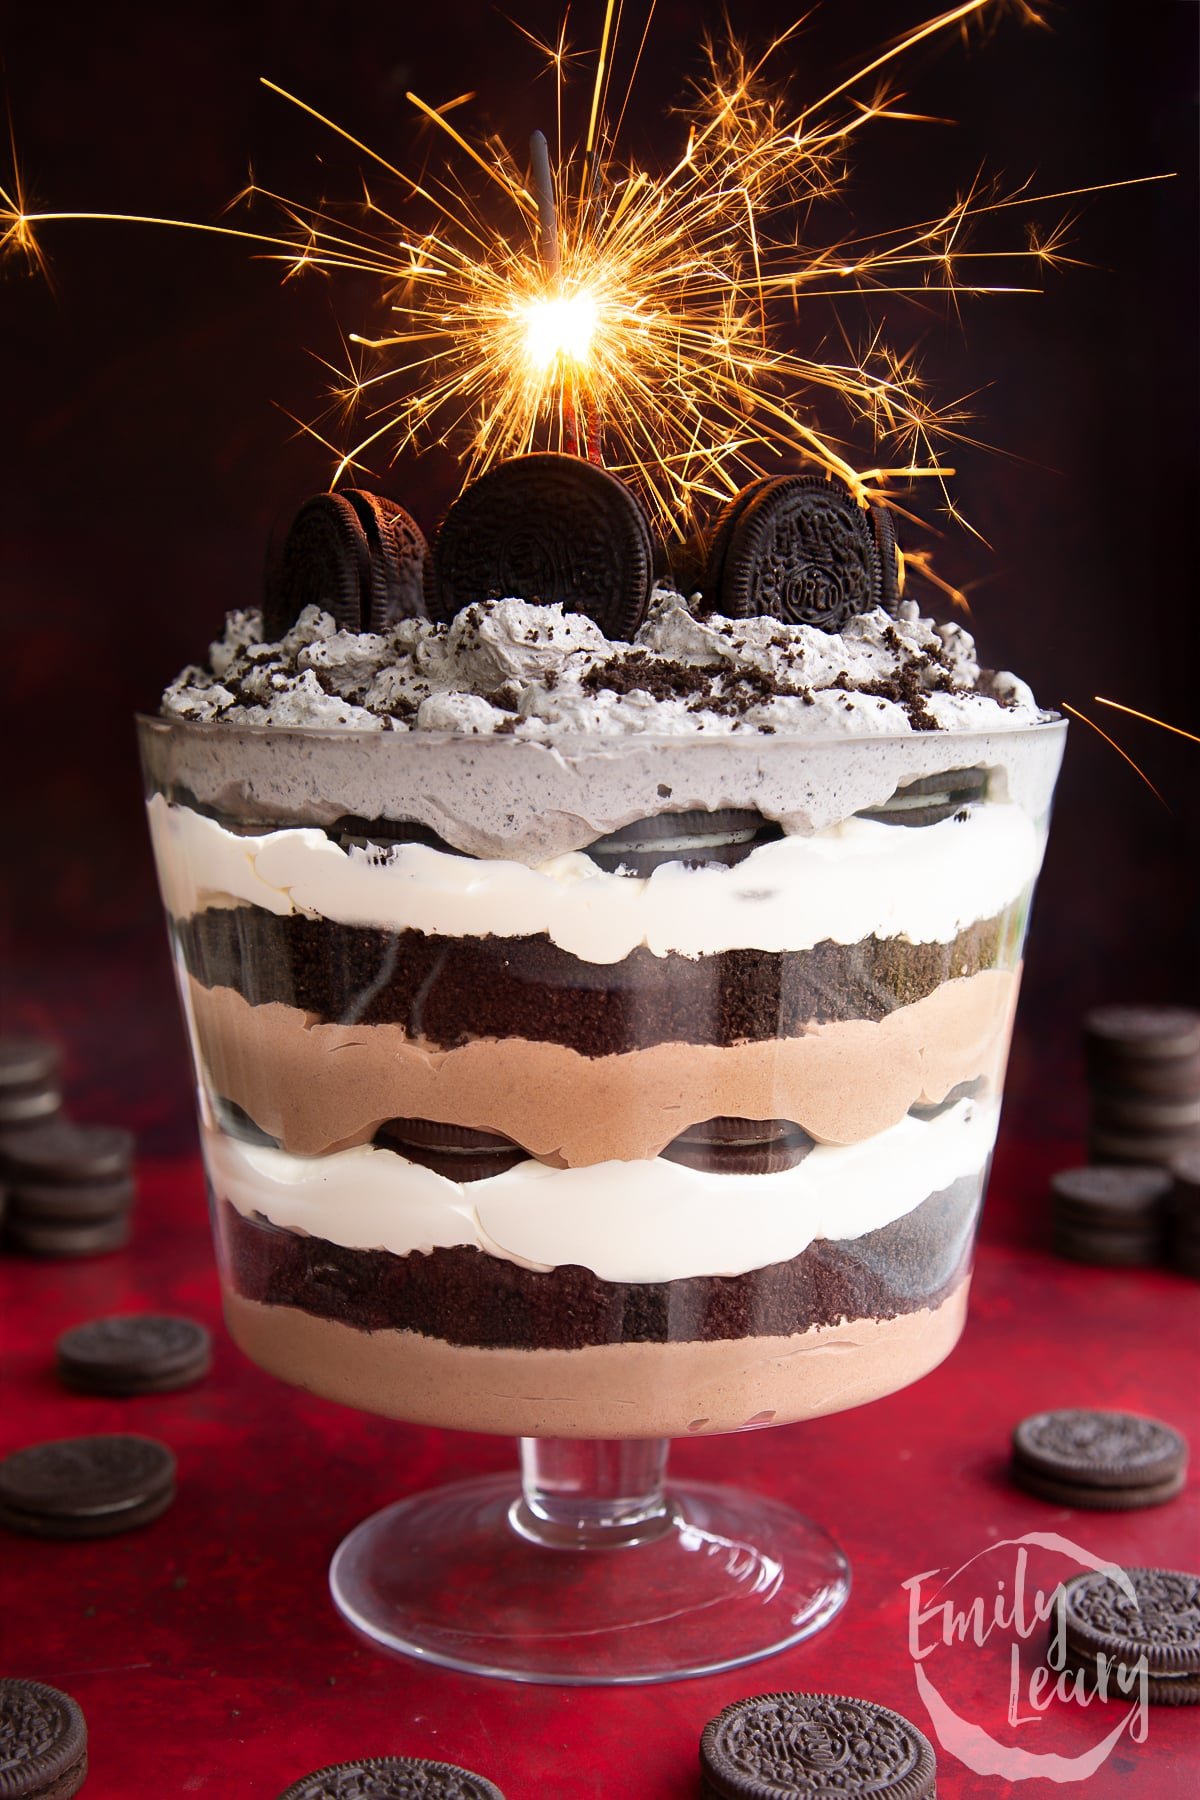 Oreo trifle with layers of chocolate pudding, whipped cream and Oreos. It's decorated with a sparkler.